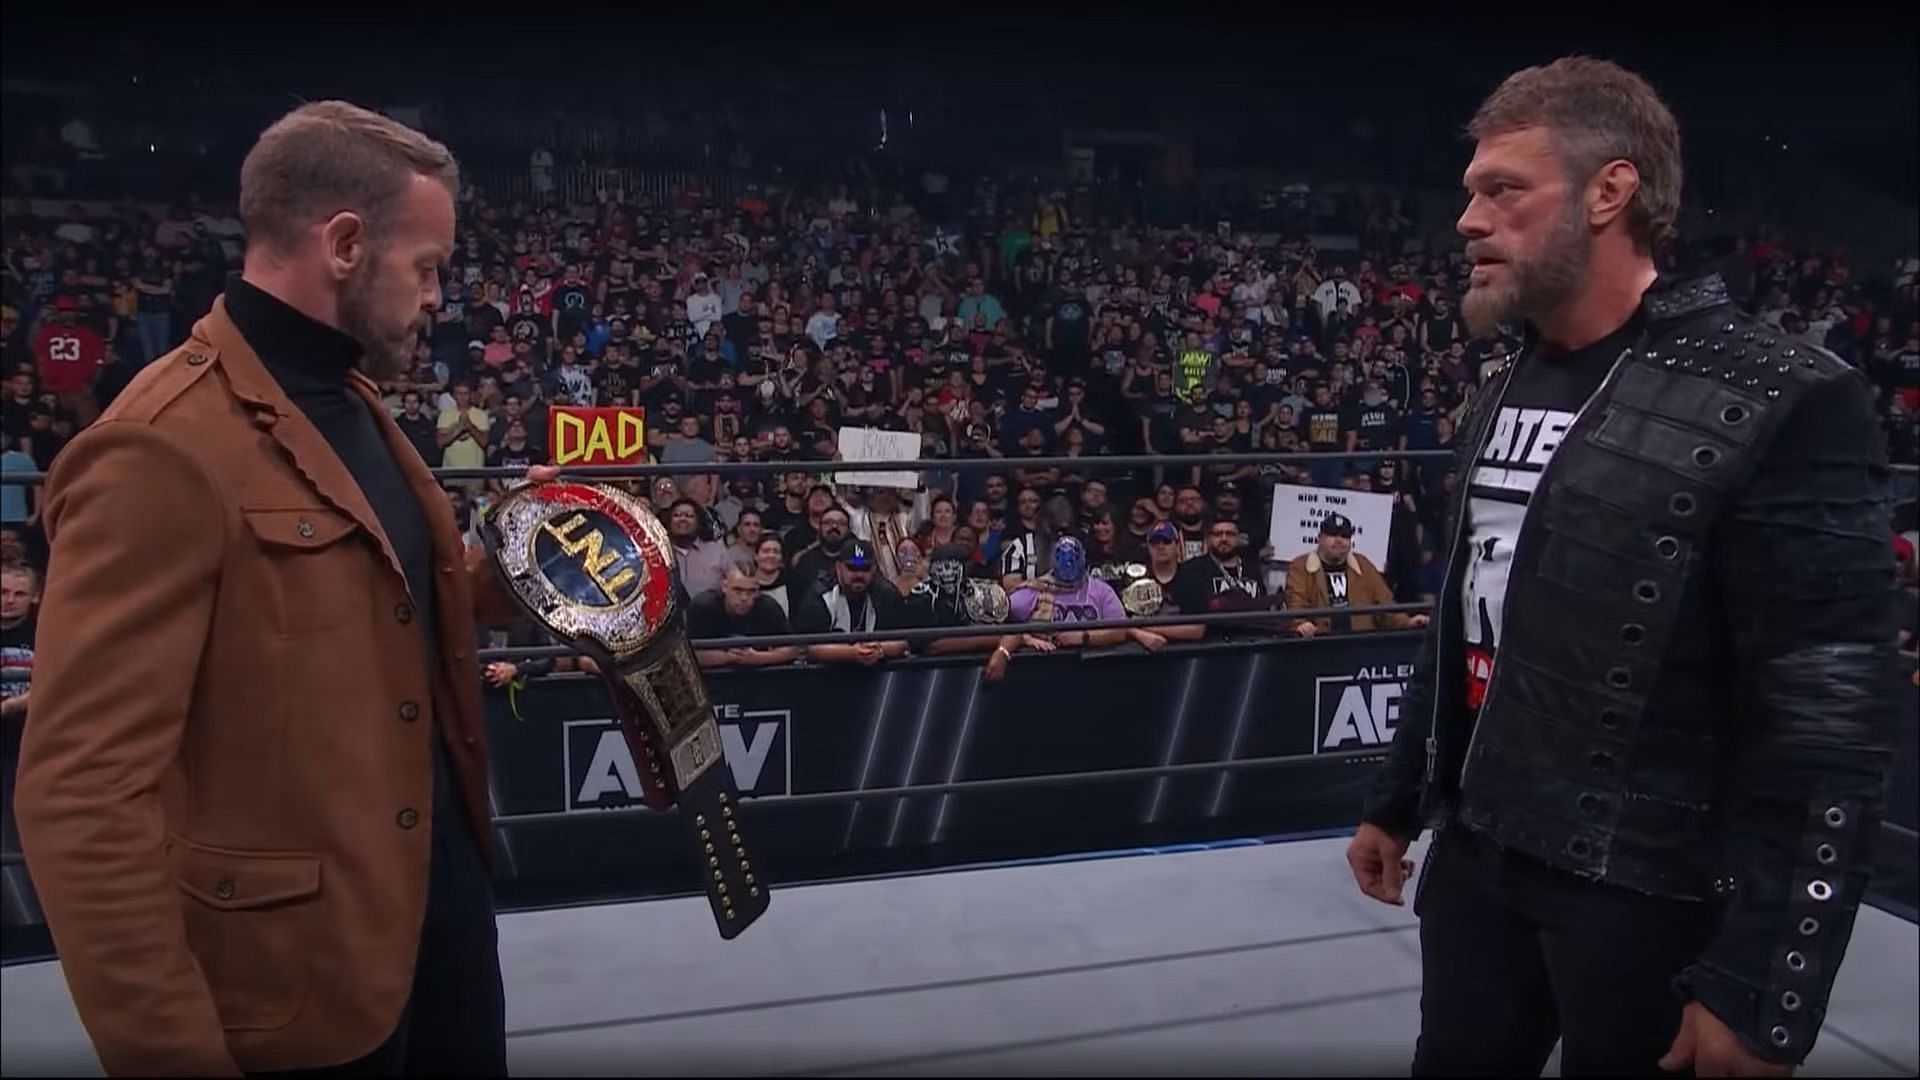 Could the feud between Copeland and Cage be one of the best storylines in AEW history?